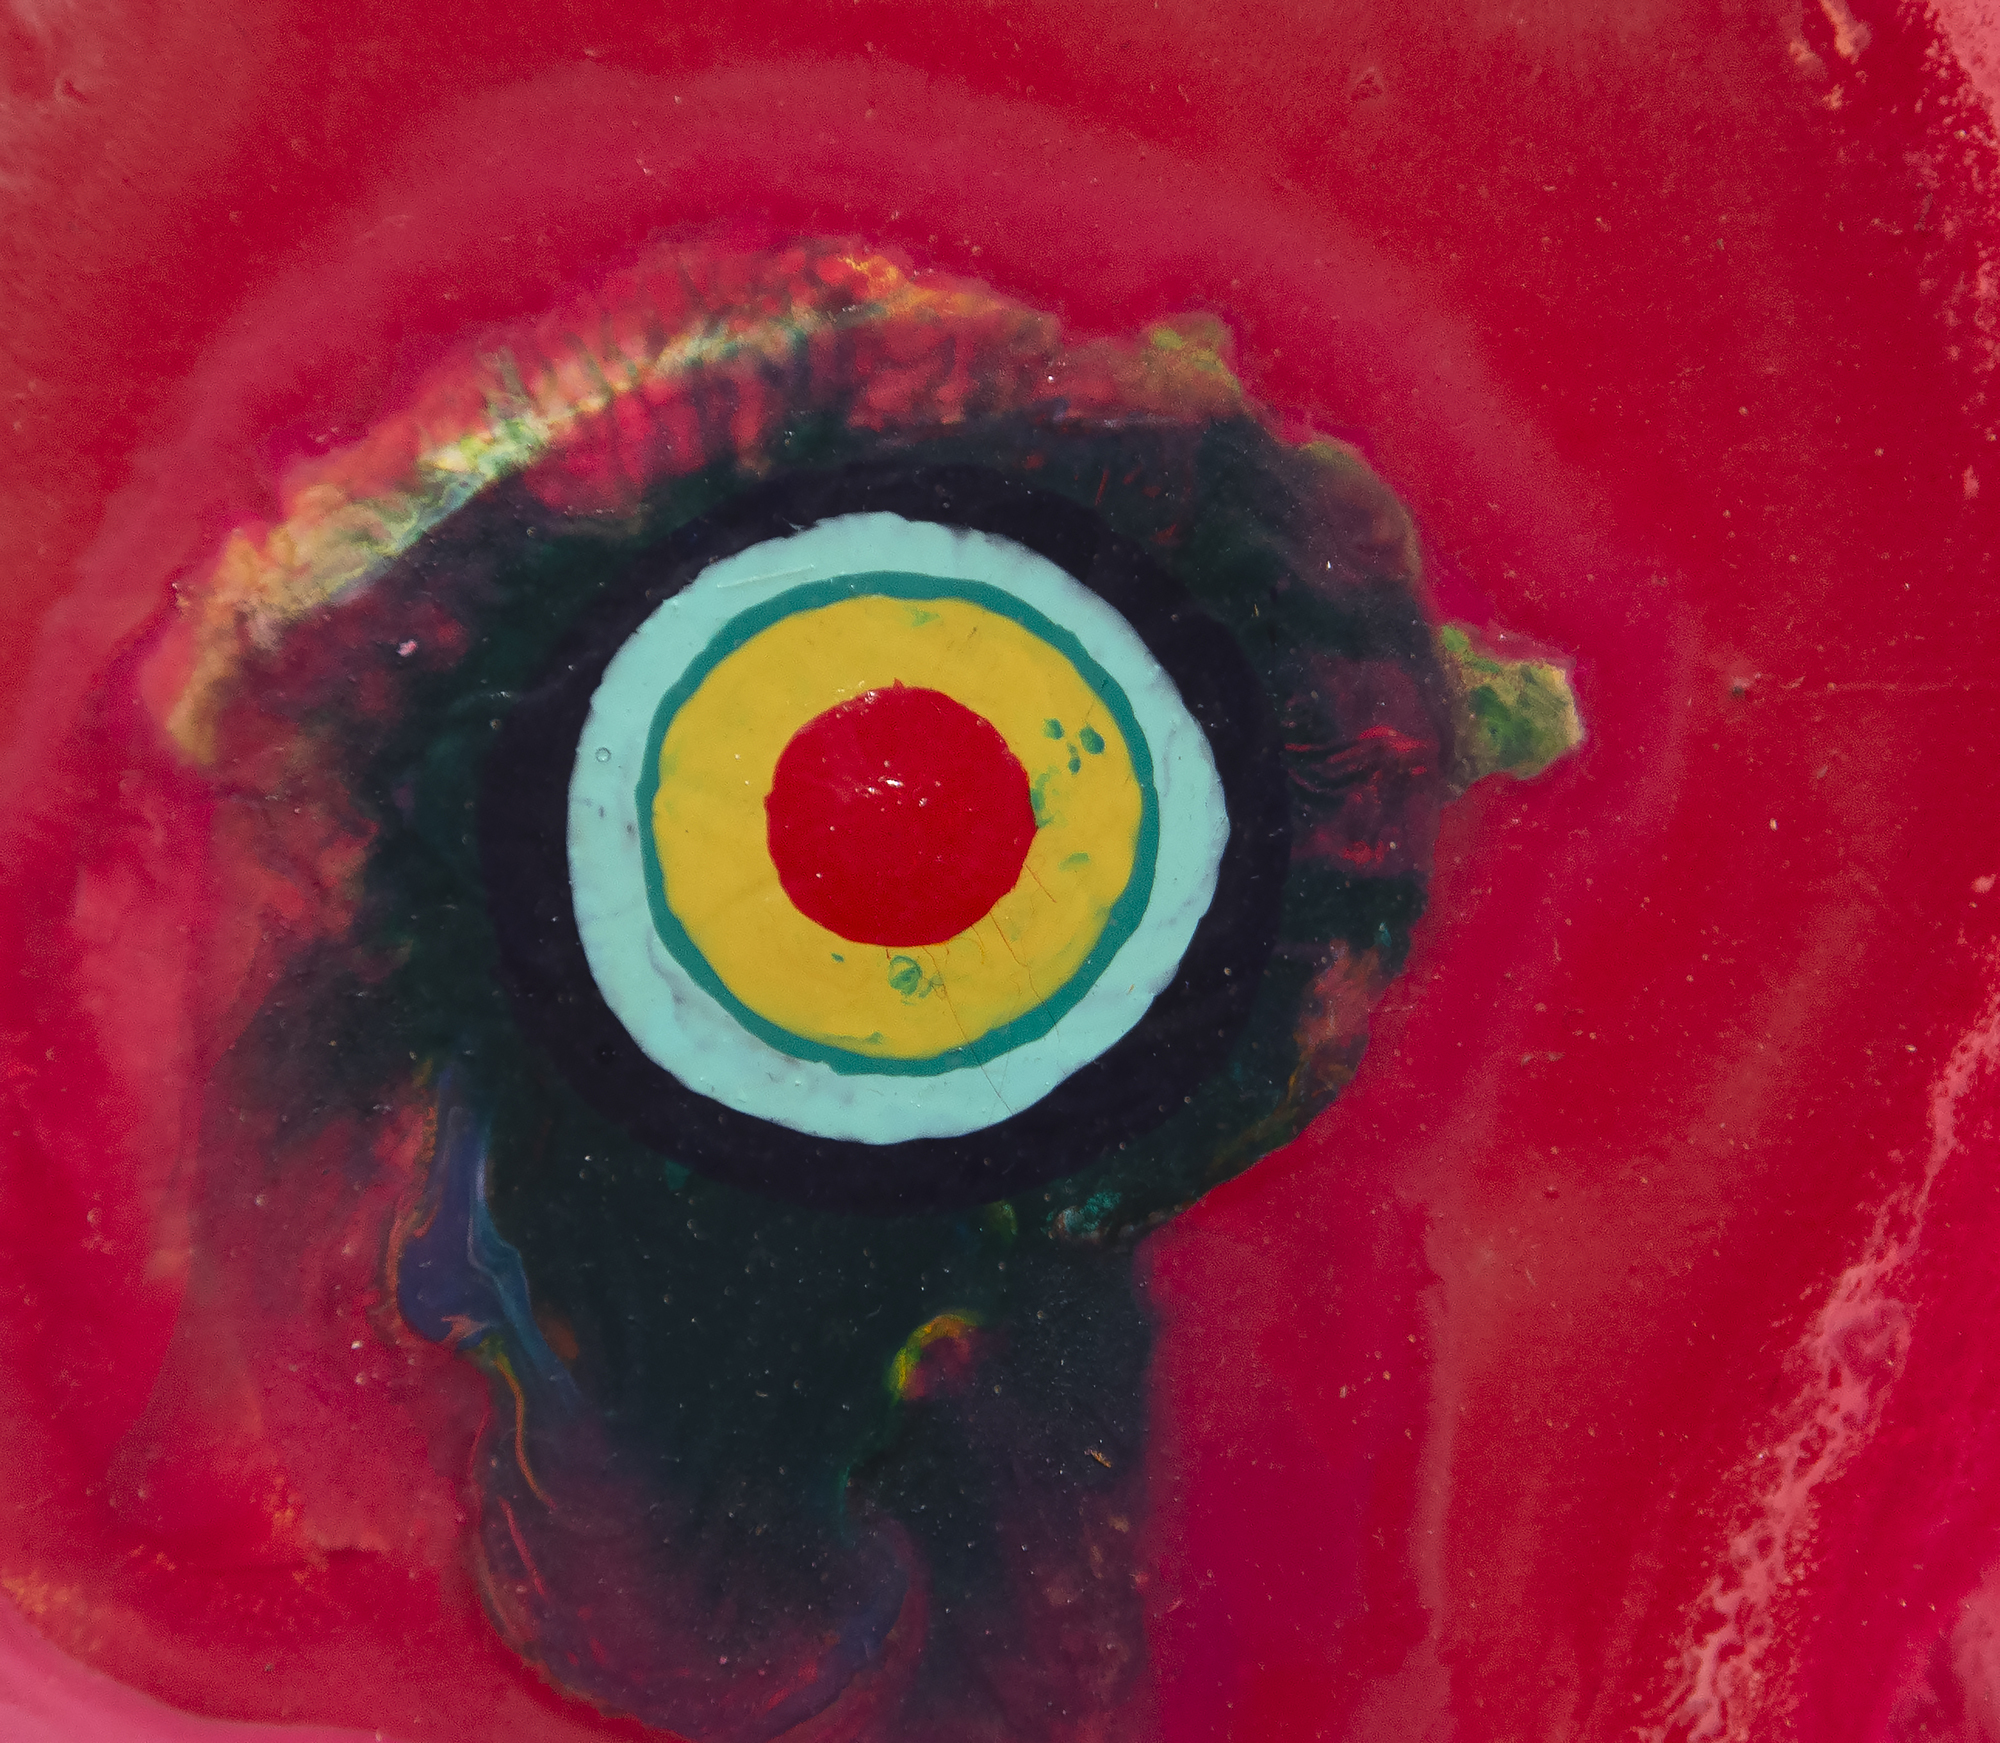 As a member of the legendary Gutai Art Association that flourished between 1954 and 1972, Sadamasa Motonaga emerged when post-atomic surrealist existentialism was at the forefront of artistic development in Japan. Yet he chose a different path. He turned his back on the destruction wrought by the war and created work that was fresh, jubilant, and playful. “Untitled” of 1966 is in his classic style, which developed concurrently with Morris Louis’ so-called ‘Veil’ paintings. It might suggest the brightly lit comb, eye and mottled plumage of a gallinaceous bird, but any such associations are probably arbitrary and unintended. Instead, it is a brilliantly successful display of Motonaga’s avant-garde take on traditional Japanese Tarashikomi — the technique that involves tilting the canvas at different angles to allow mixtures of resin and enamel to flow upon one another before the paint is fully dry.